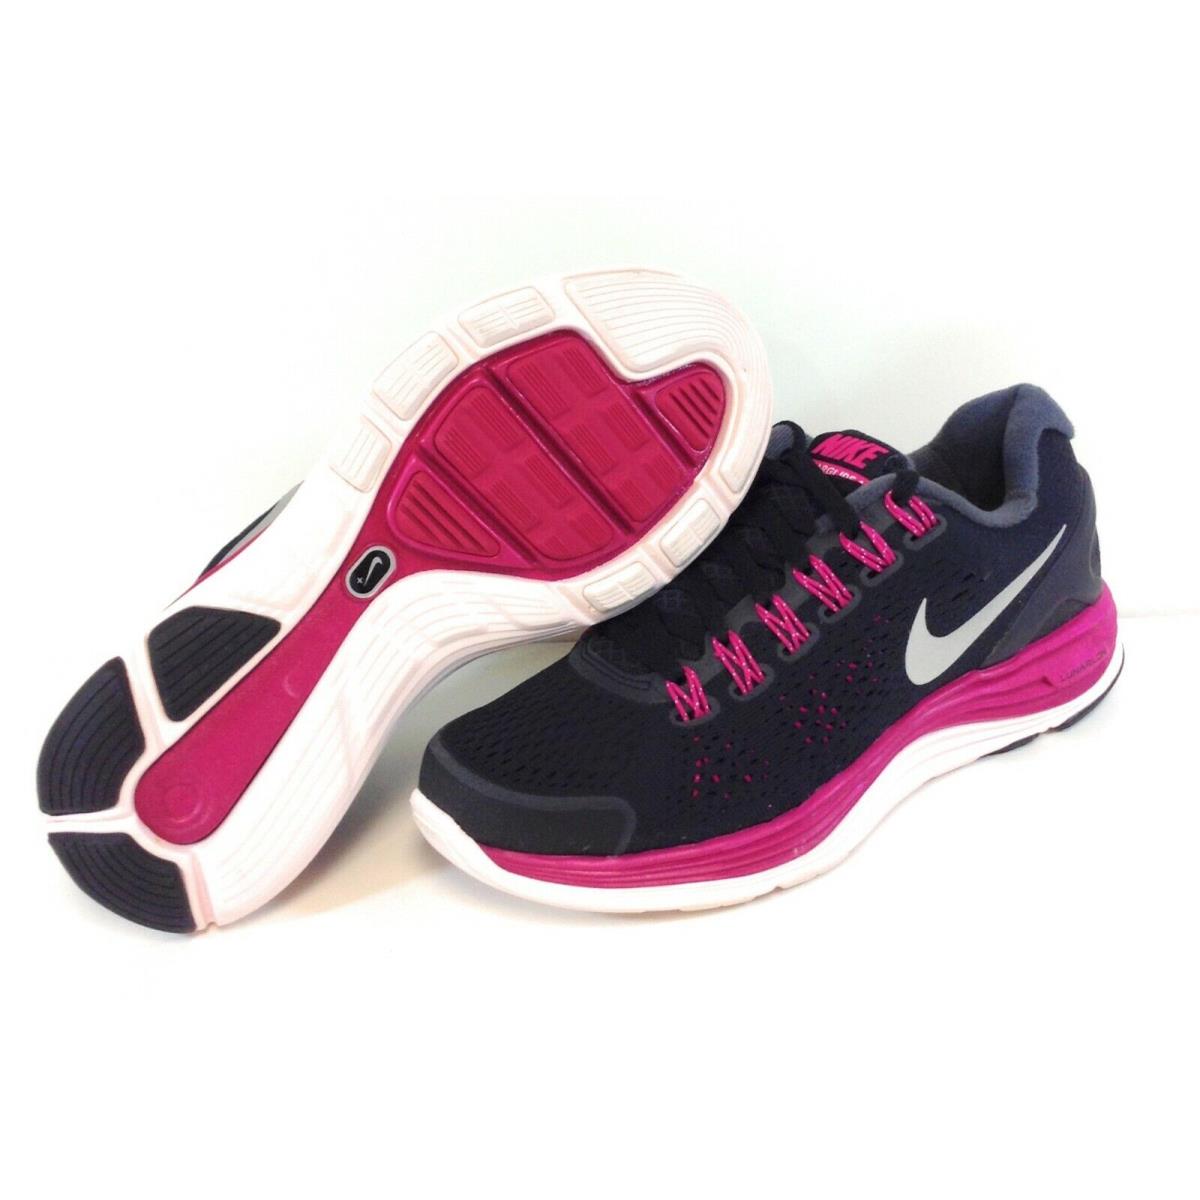 Womens Nike Lunarglide + 4 524978 006 Black Fireberry 2012 DS Sneakers Shoes - Black